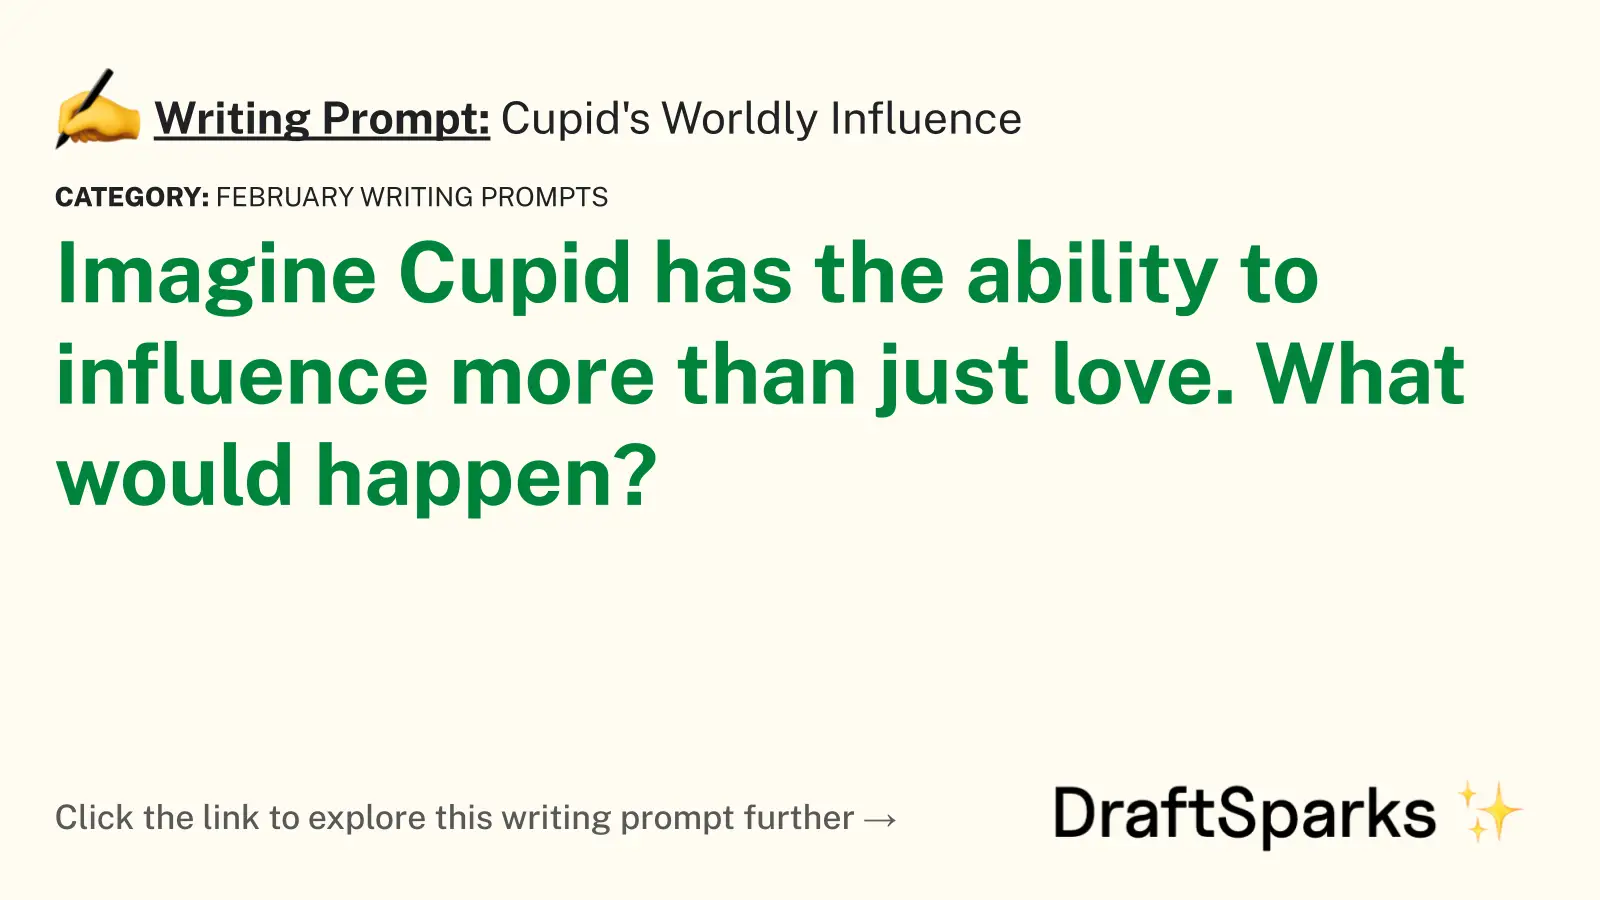 Cupid’s Worldly Influence